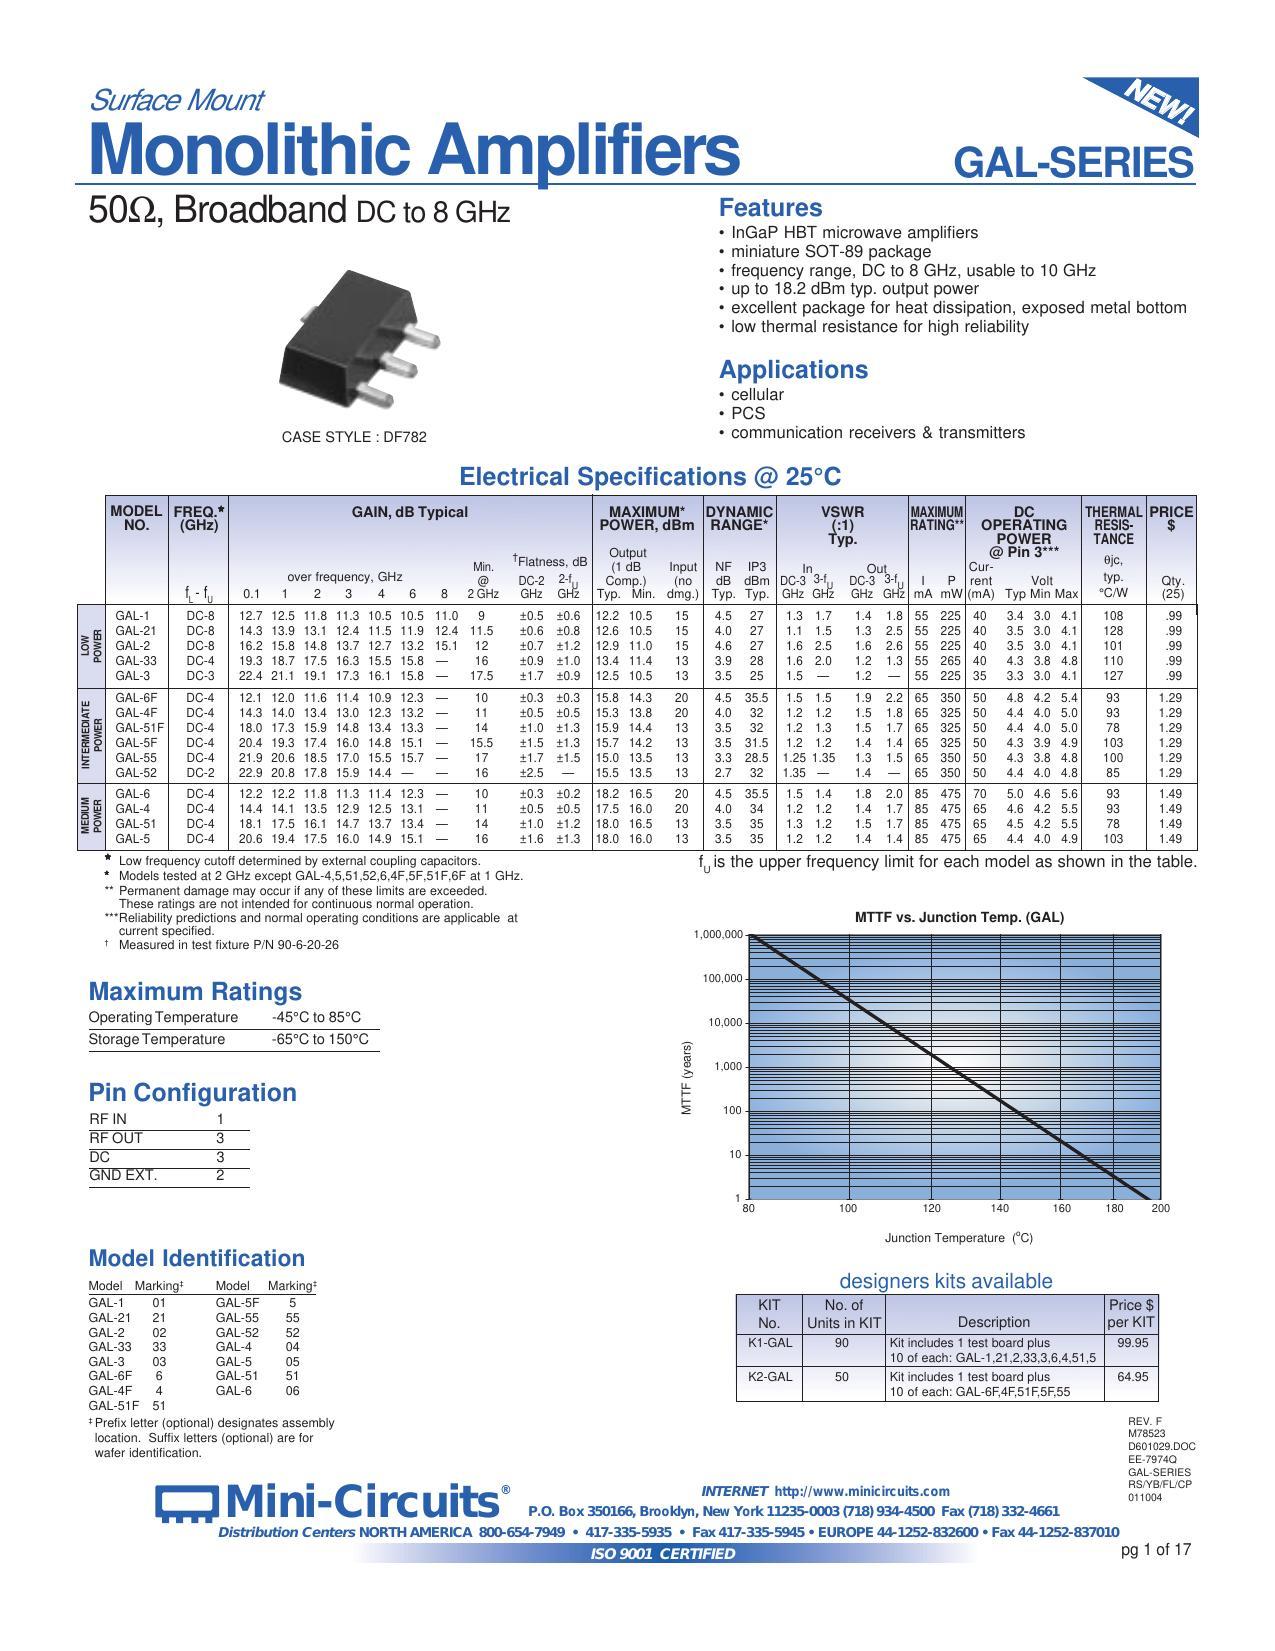 gal-series-5092-broadband-dc-to-8-ghz-monolithic-amplifiers.pdf